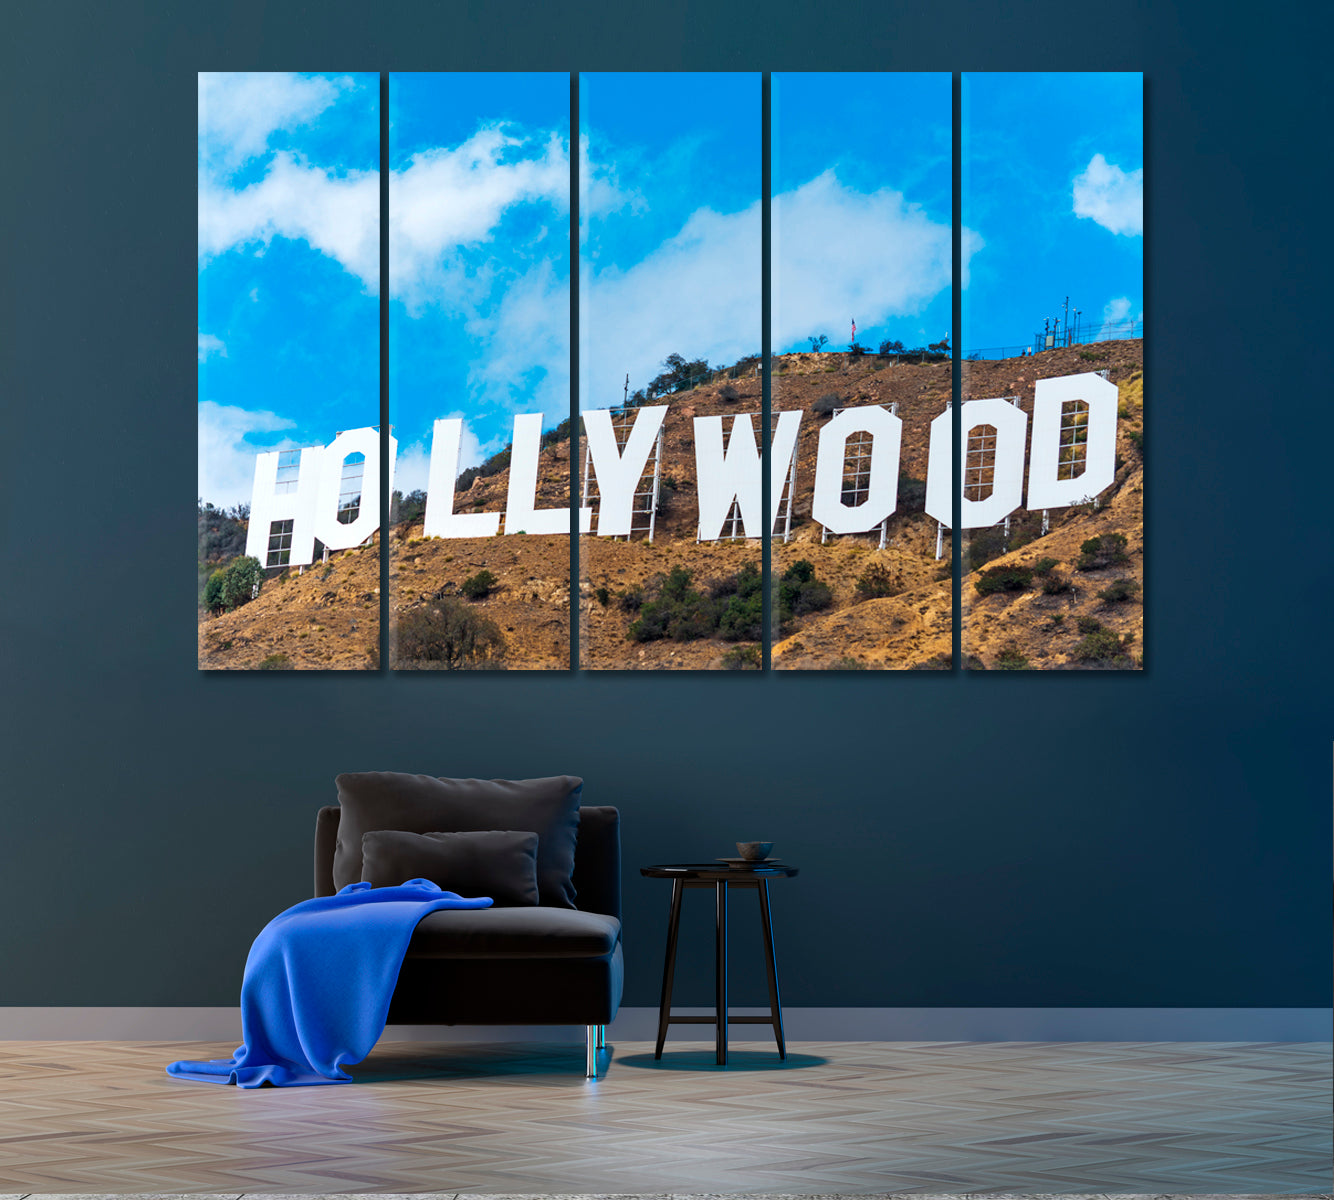 Hollywood Sign California Canvas Print ArtLexy 5 Panels 36"x24" inches 